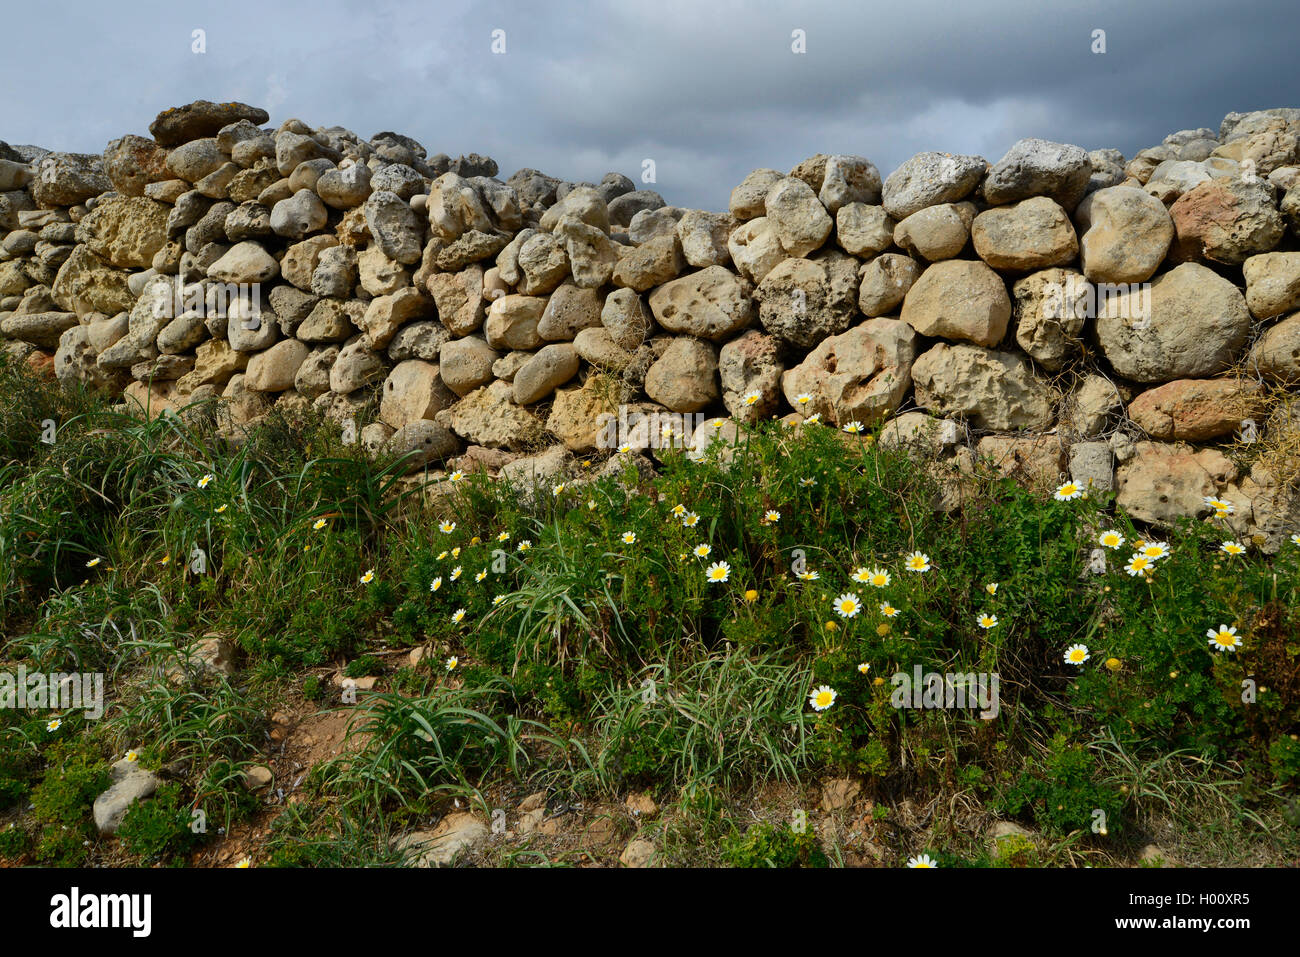 dry-stone wall buildt with MarÞs stones, shortly before a thunderstorm, Spain, Balearen, Menorca Stock Photo